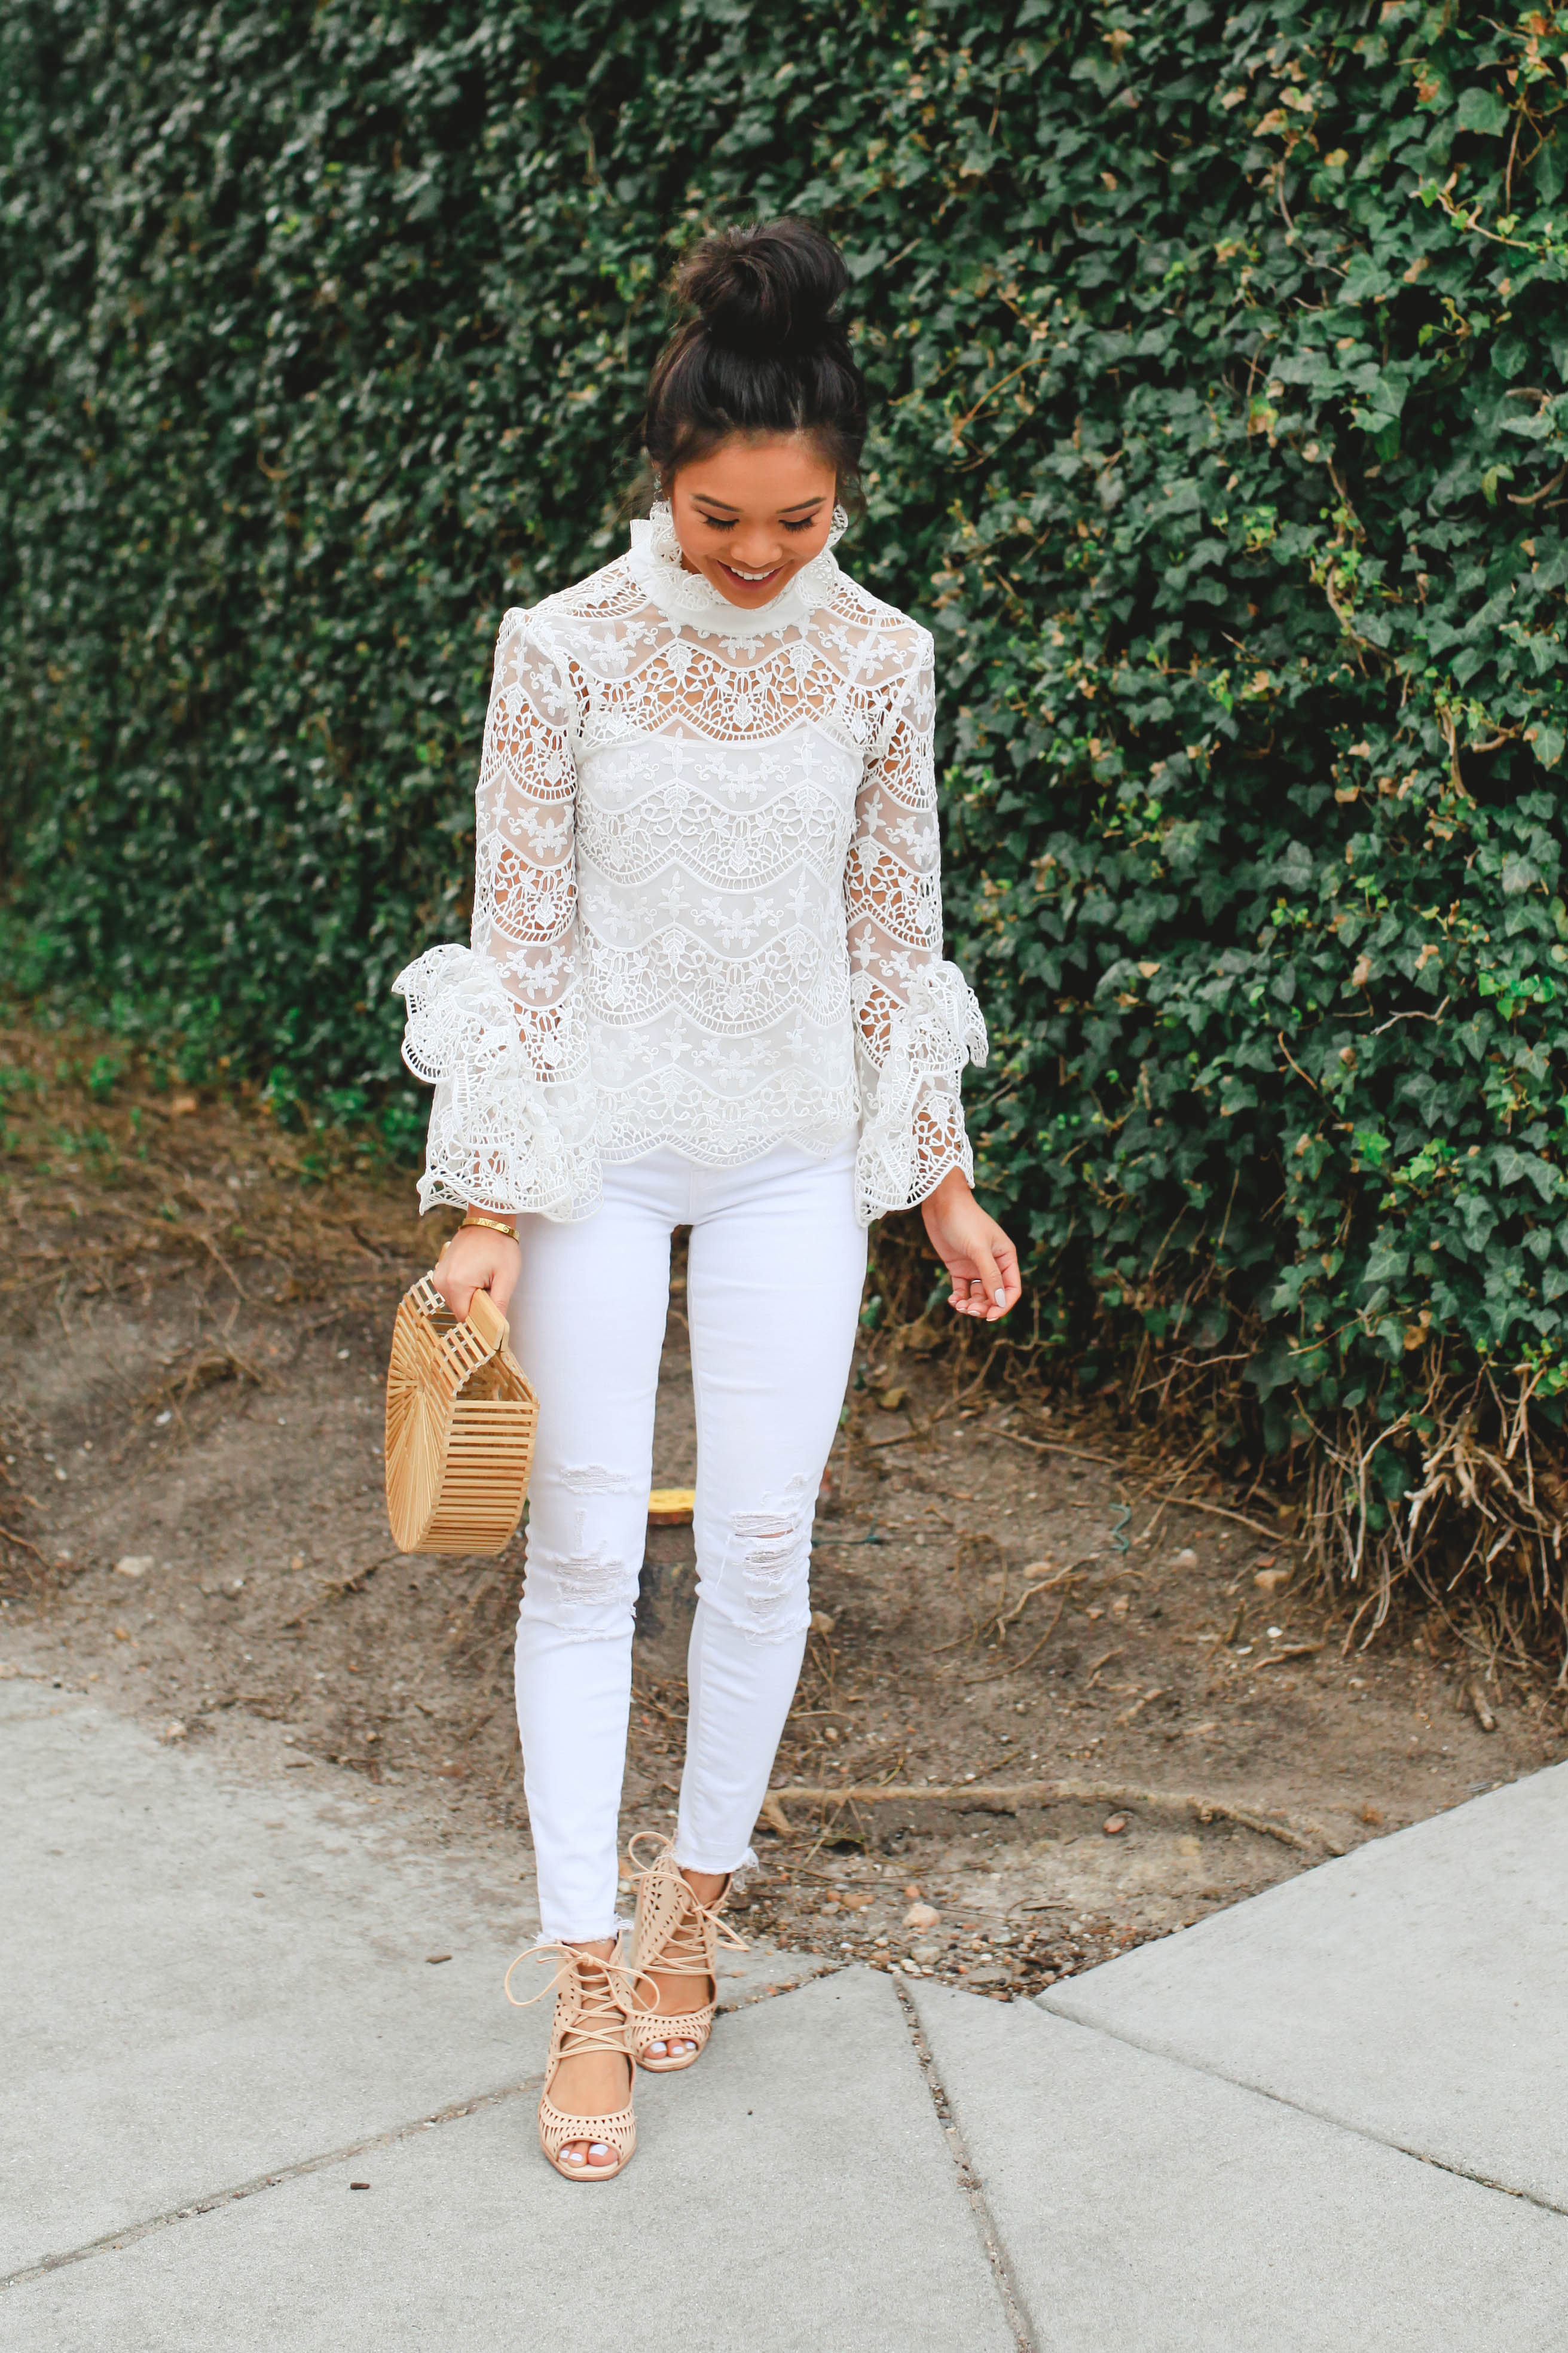 The Perfect White Lace Blouse - Color & Chic